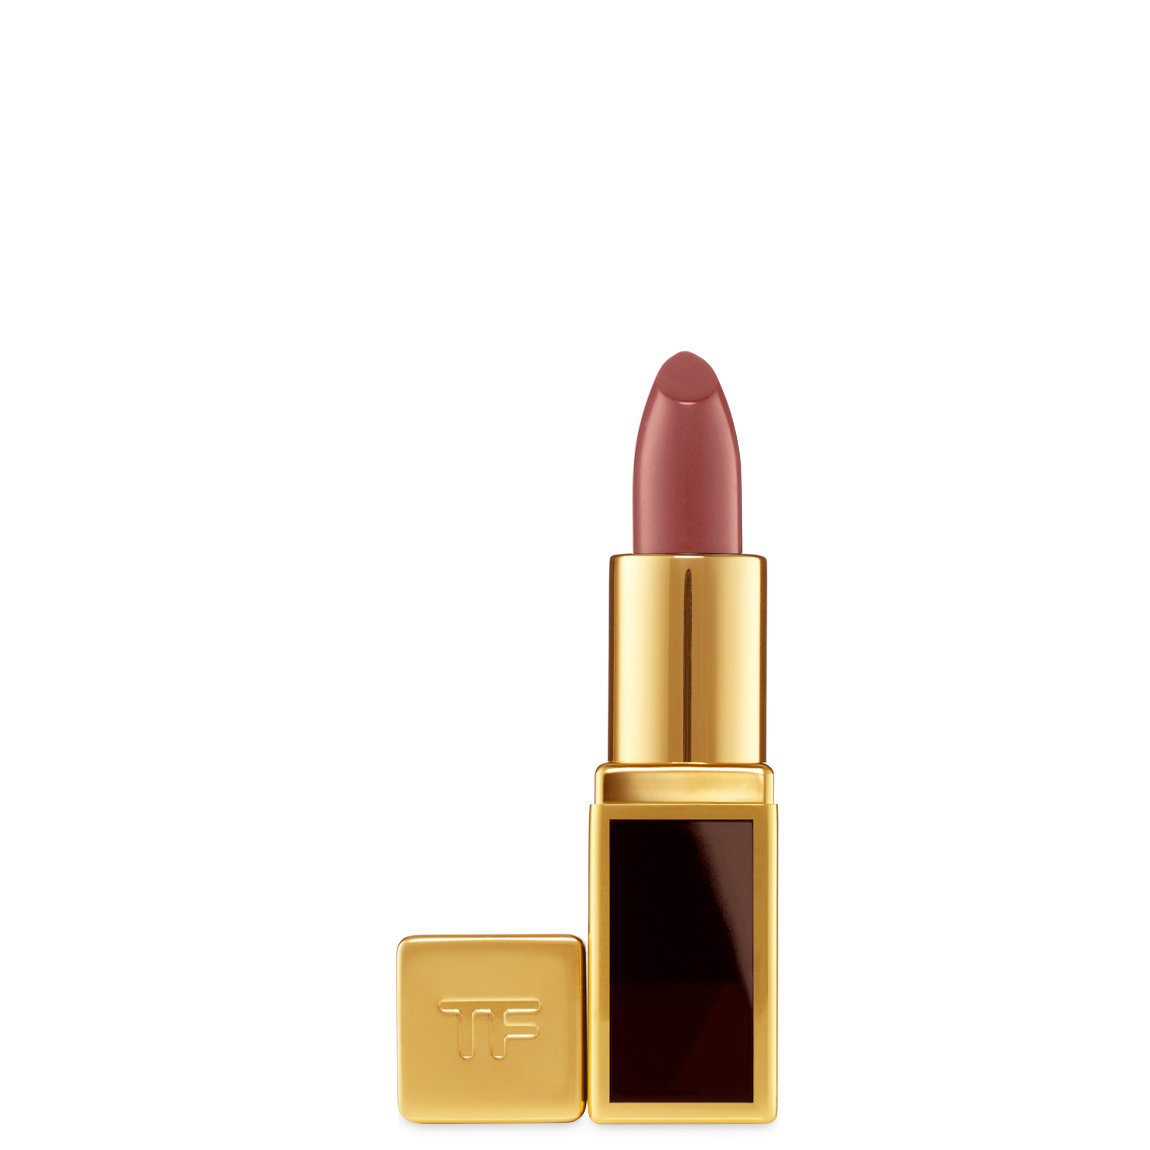 Free deluxe mini Lip Color in Casablanca with any TOM FORD purchase